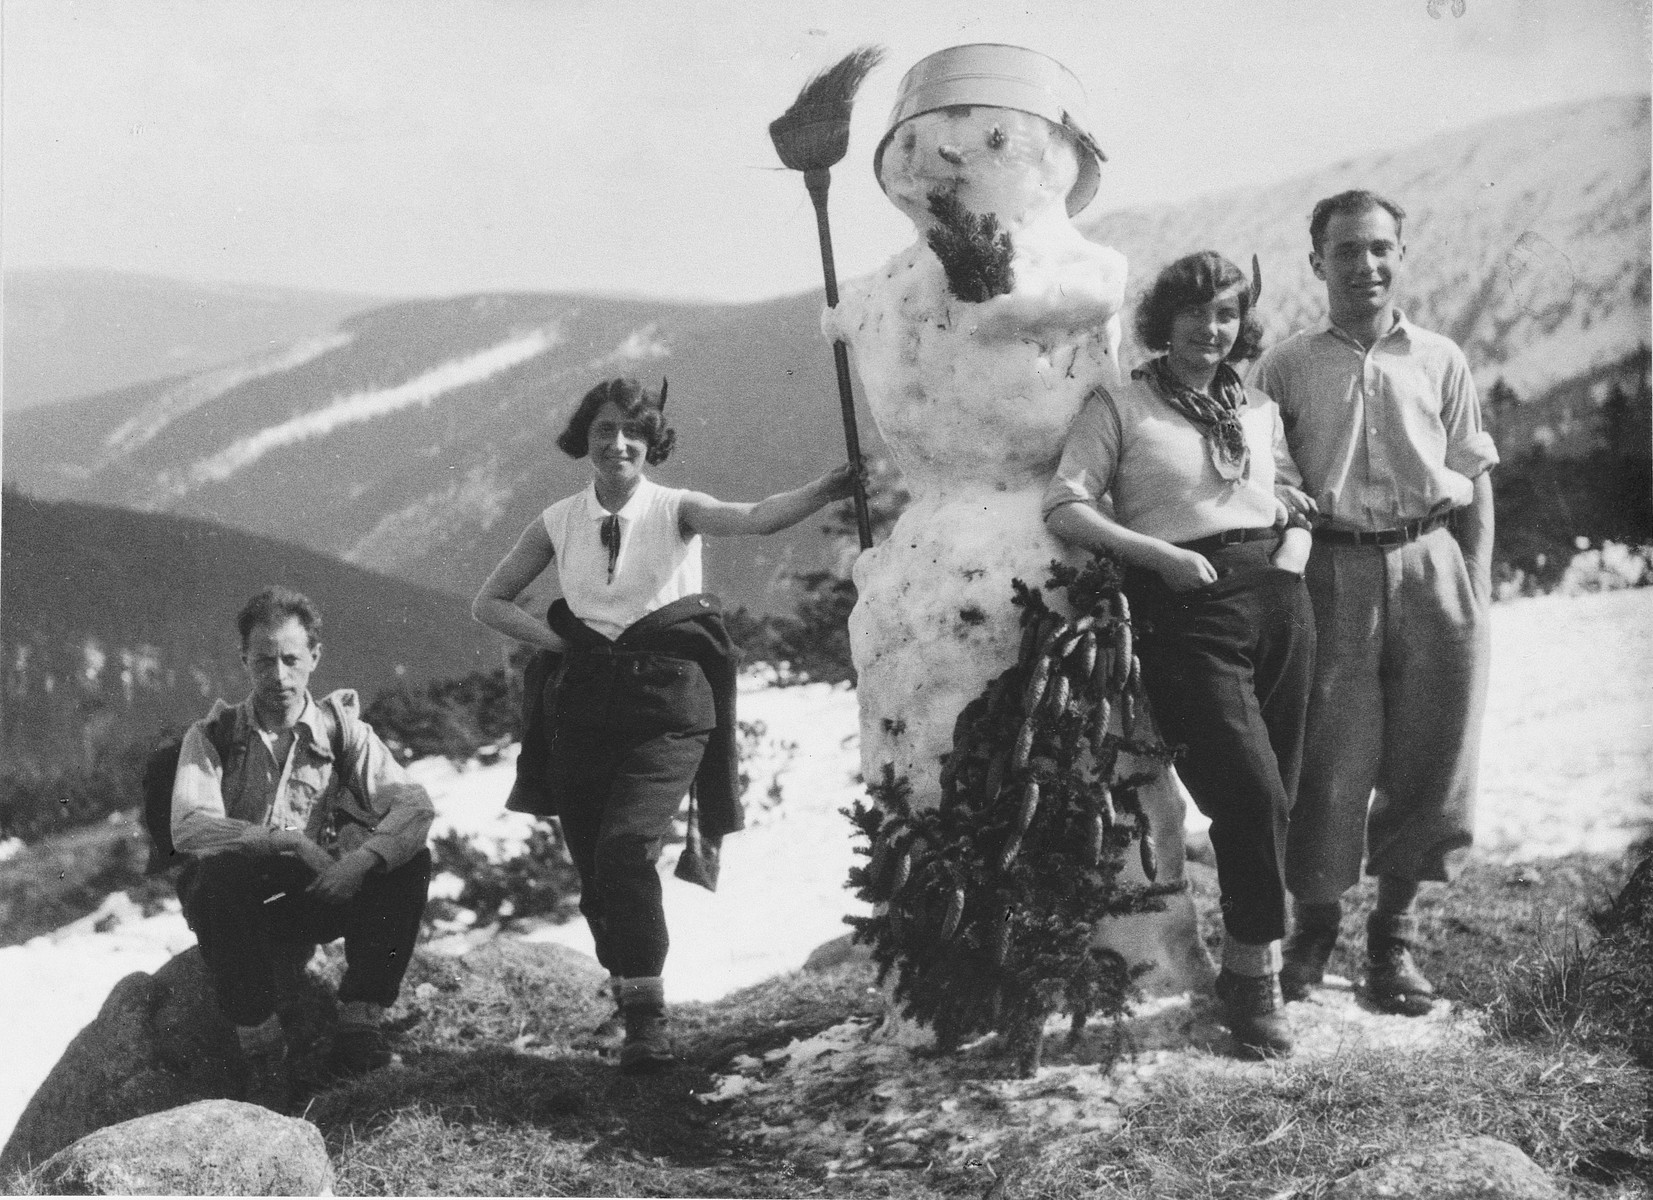 Four friends build a snowman in the Czech mountains.

Katerina Spitzer is pictured second from the right.